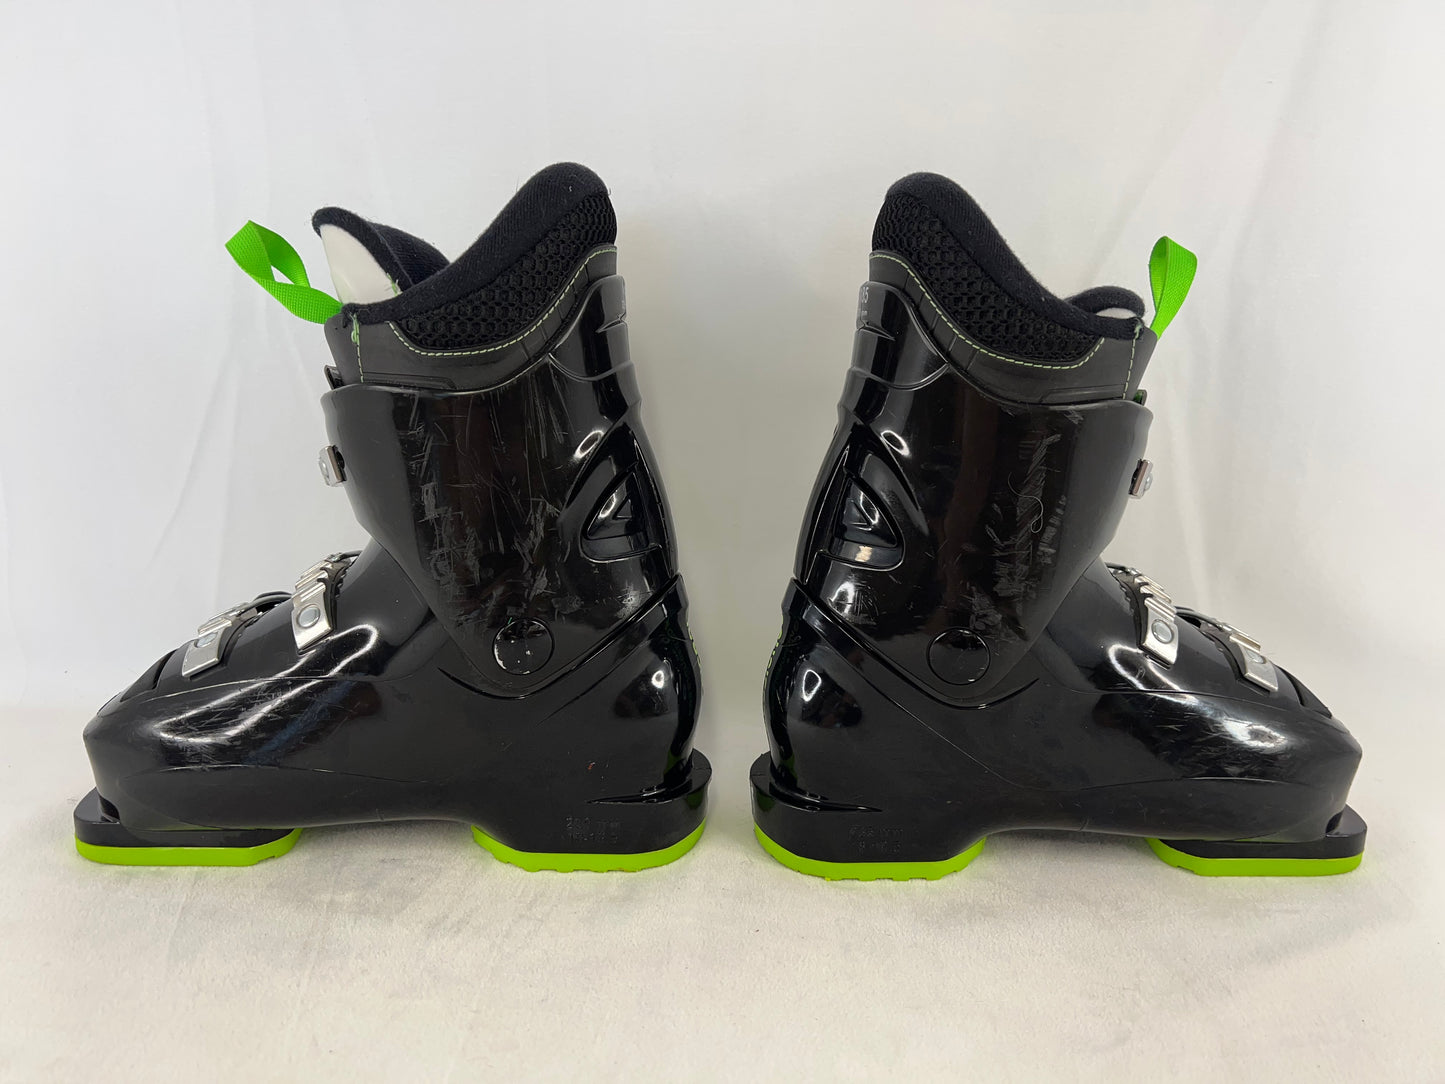 Ski Boots Mondo Size 18.0-19.5 Child Size 12.5-13.5 235 mm Rossignol Comp J3 Black and Lime  Excellent As New